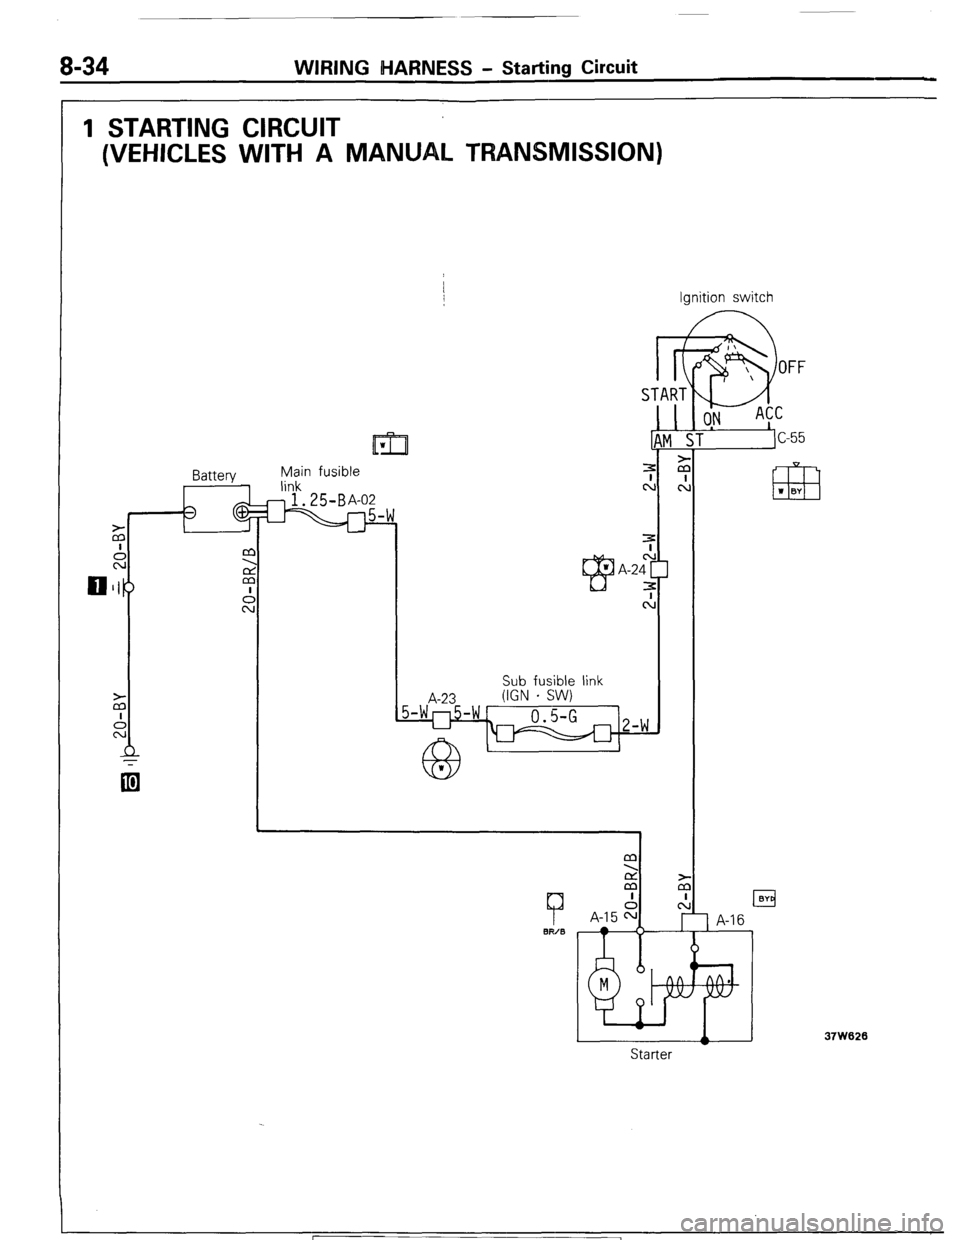 MITSUBISHI MONTERO 1987 1.G Workshop Manual 8-34 WIRING MARNESS - Starting Circuit 
1 STARTING CIRCUIT 
(VEHICLES WITH A MANUAL TRANSMISSION) 
Ignition switch 
Battery Main fusible 
link 
@.25B+ 
A-23 Sub fusible link 
(IGN - SW) 
7 
BIT/B 
M 
